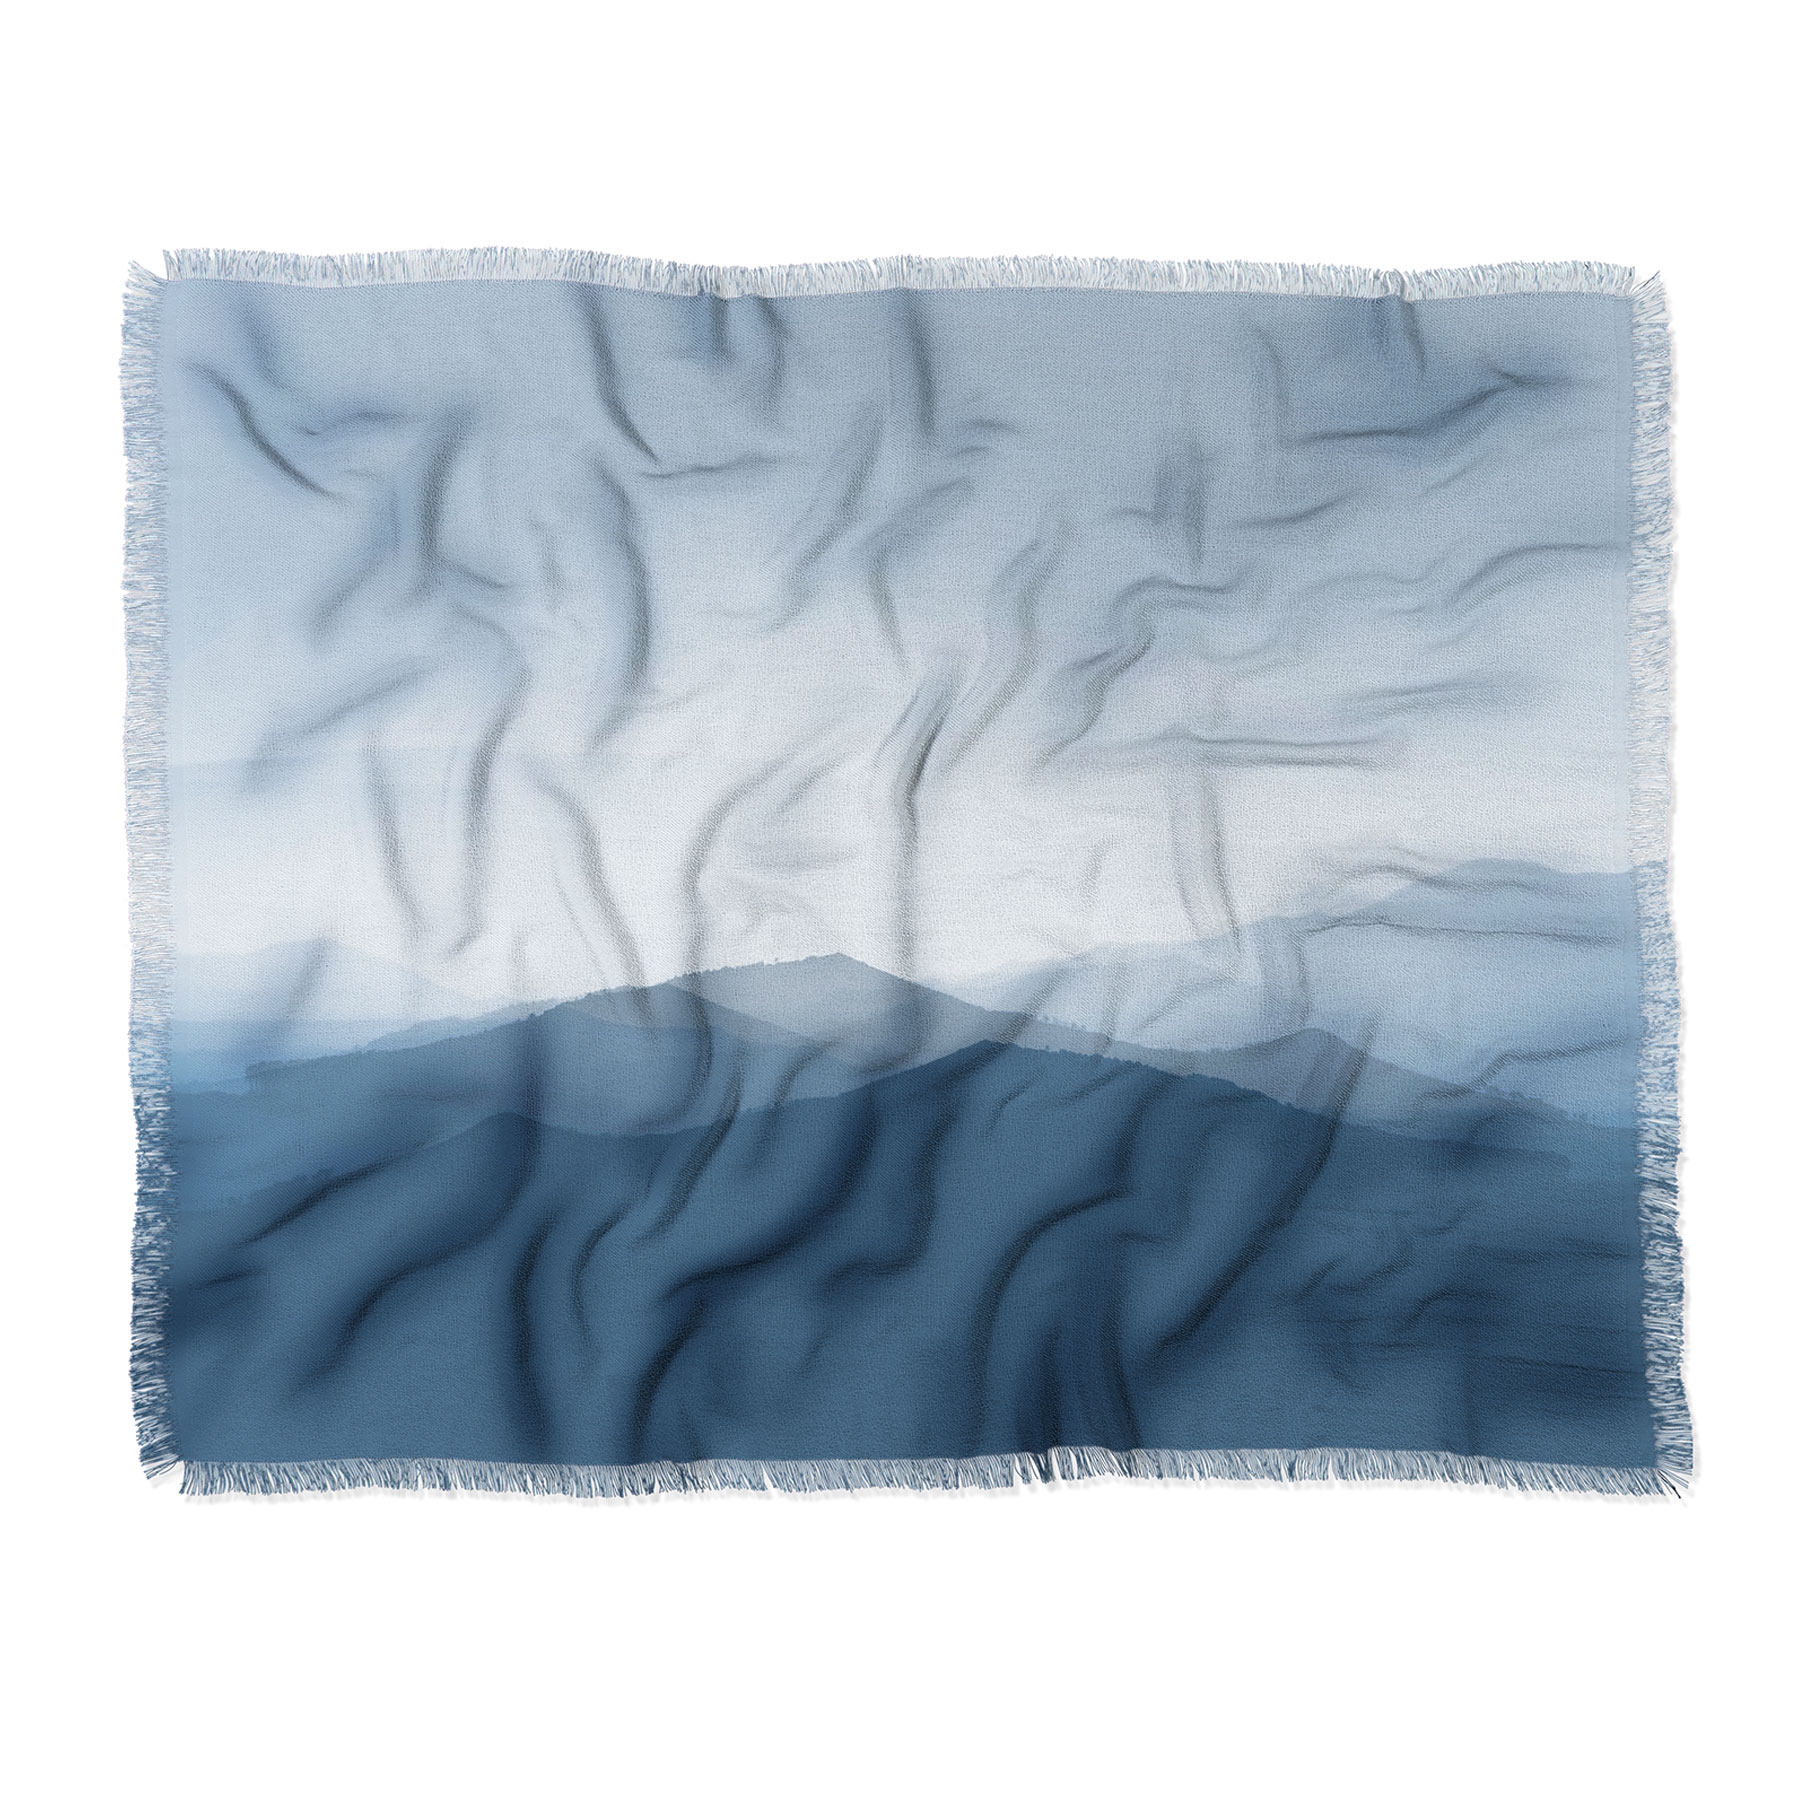 Hazy Morning Blues by Ingrid Beddoes - Woven Throw Blanket 60" x 50" - Image 0